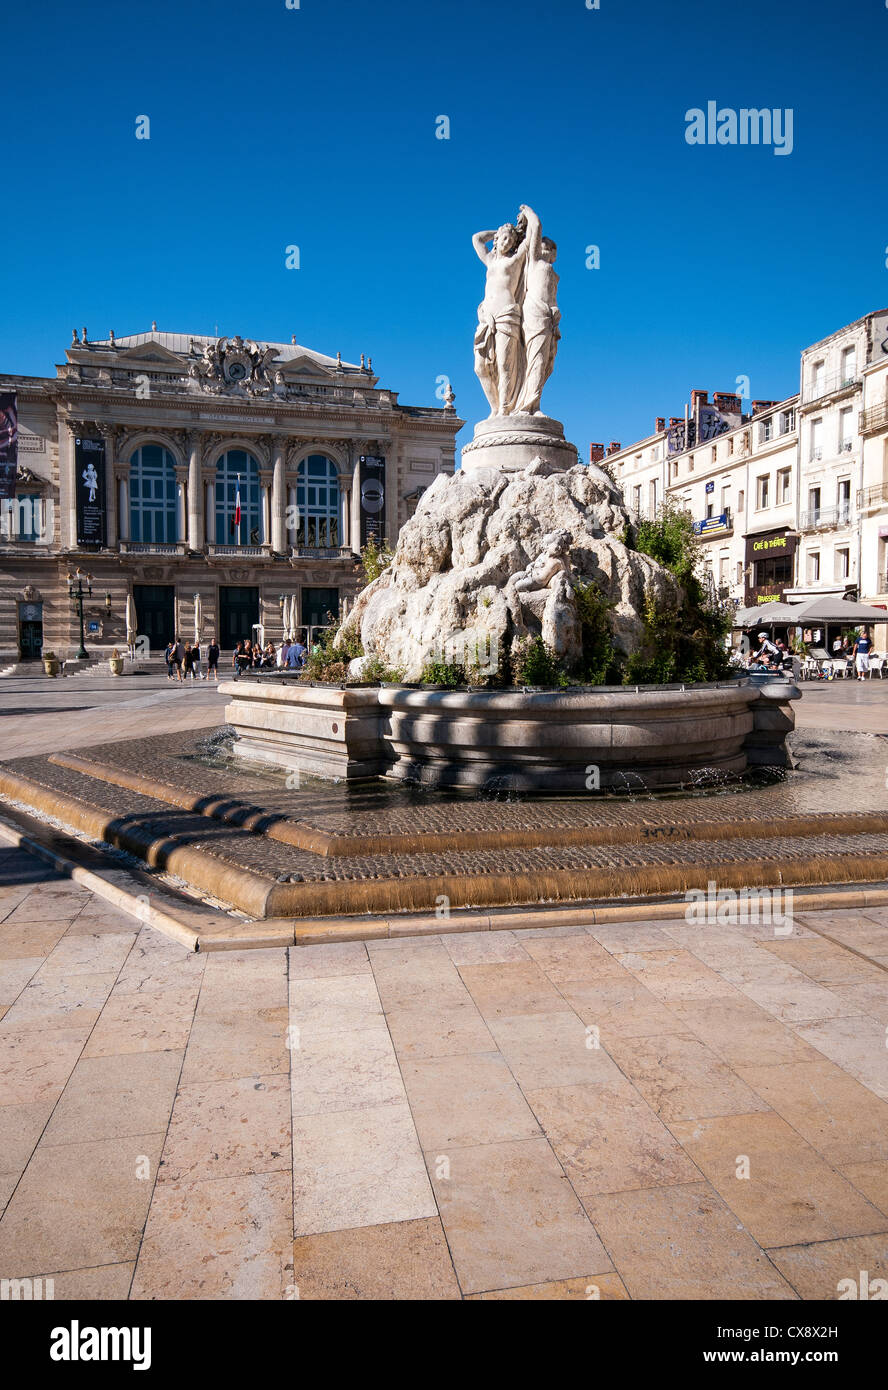 The Fountain of The Three Graces in Place de la Comédie, Montpellier, France Stock Photo